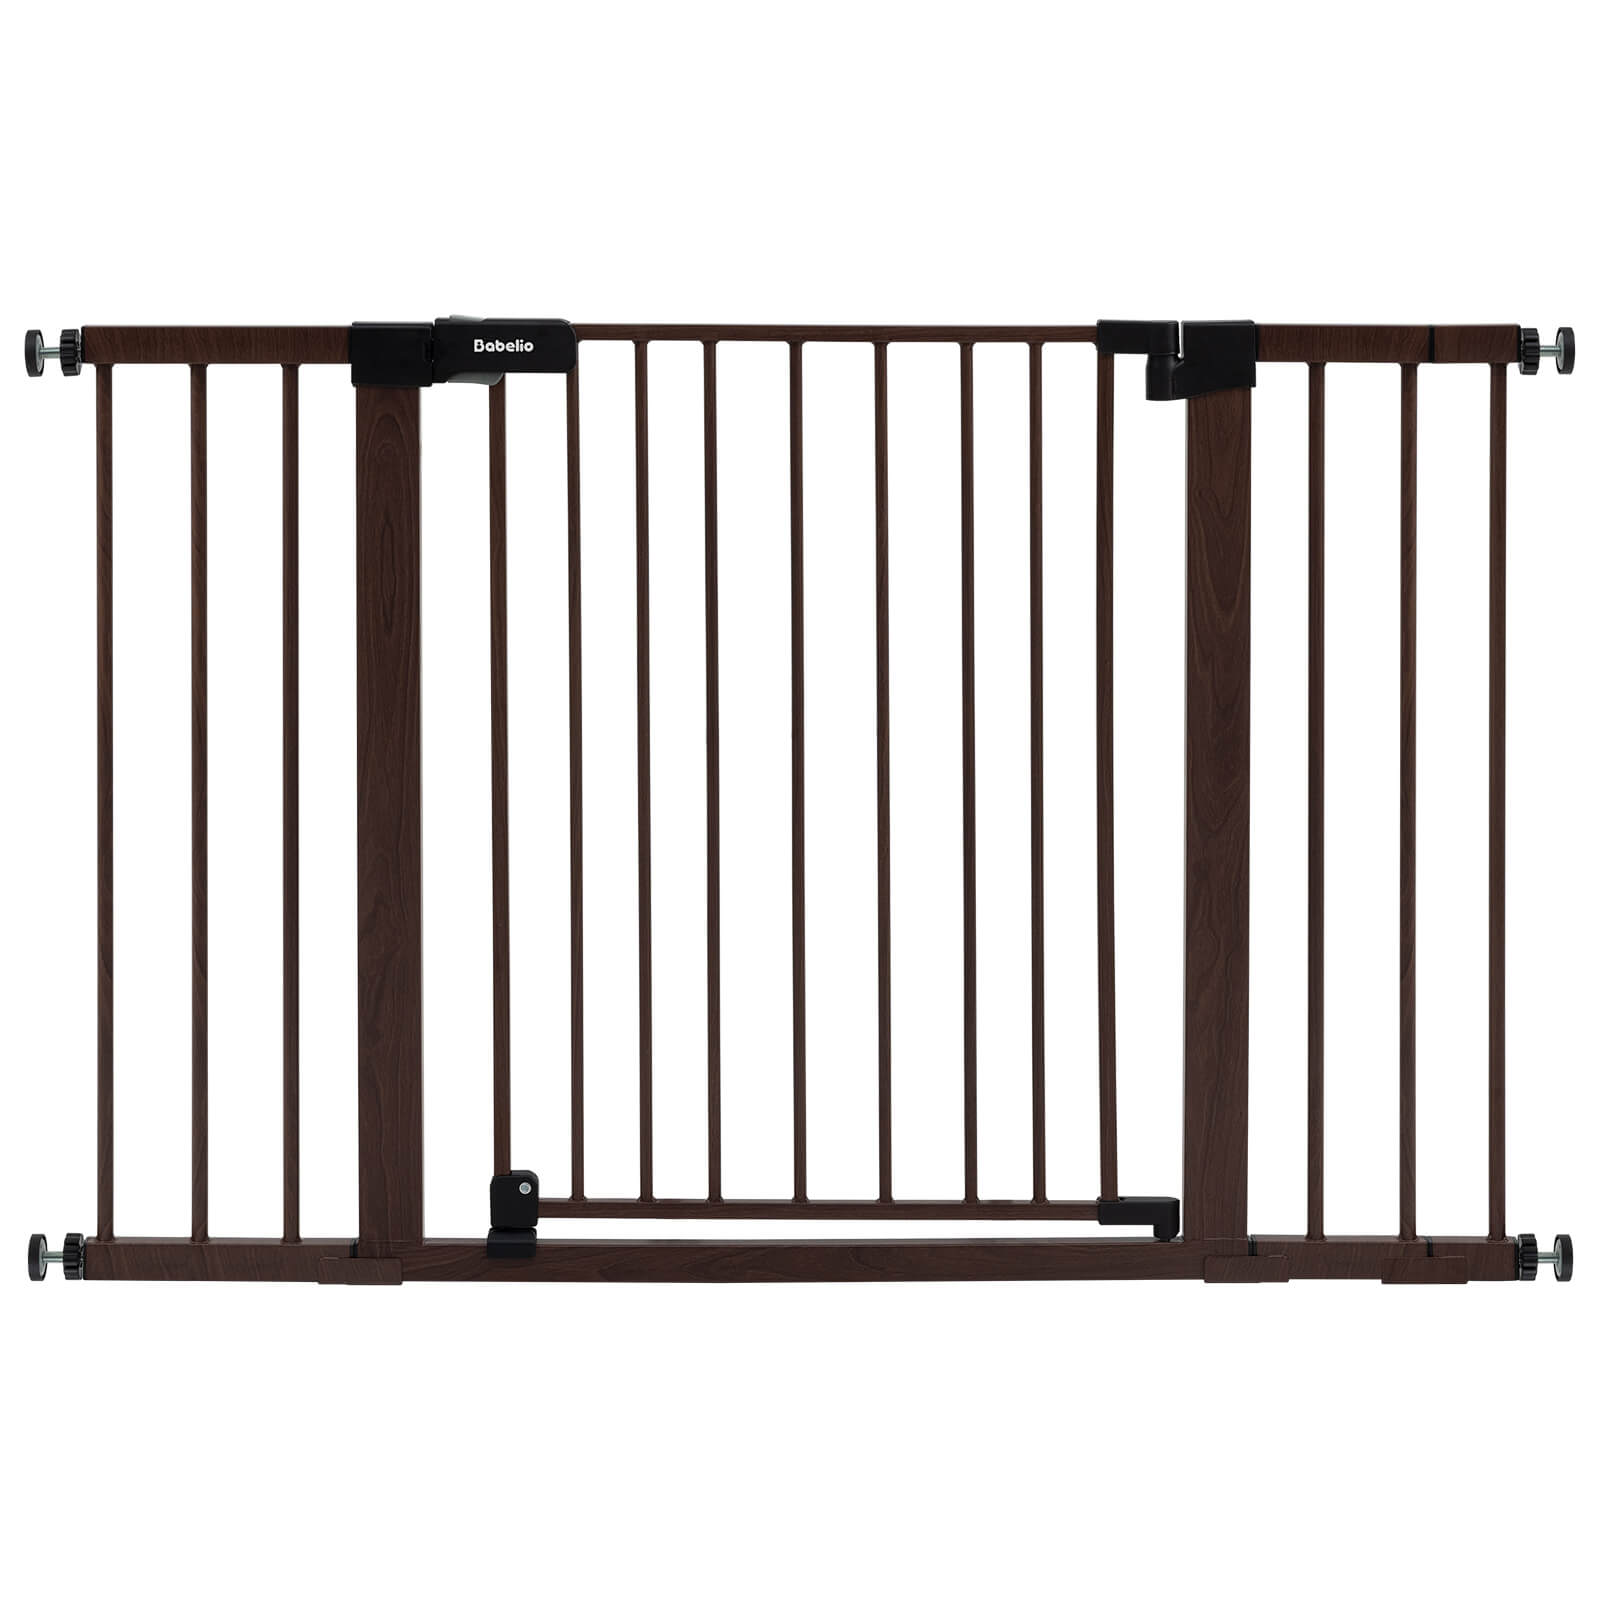 Babelio 30" High Adjustable Metal Baby/Pet Gate with Door – 29-48" Wide, Auto-Close, Wood Pattern, Easy Install